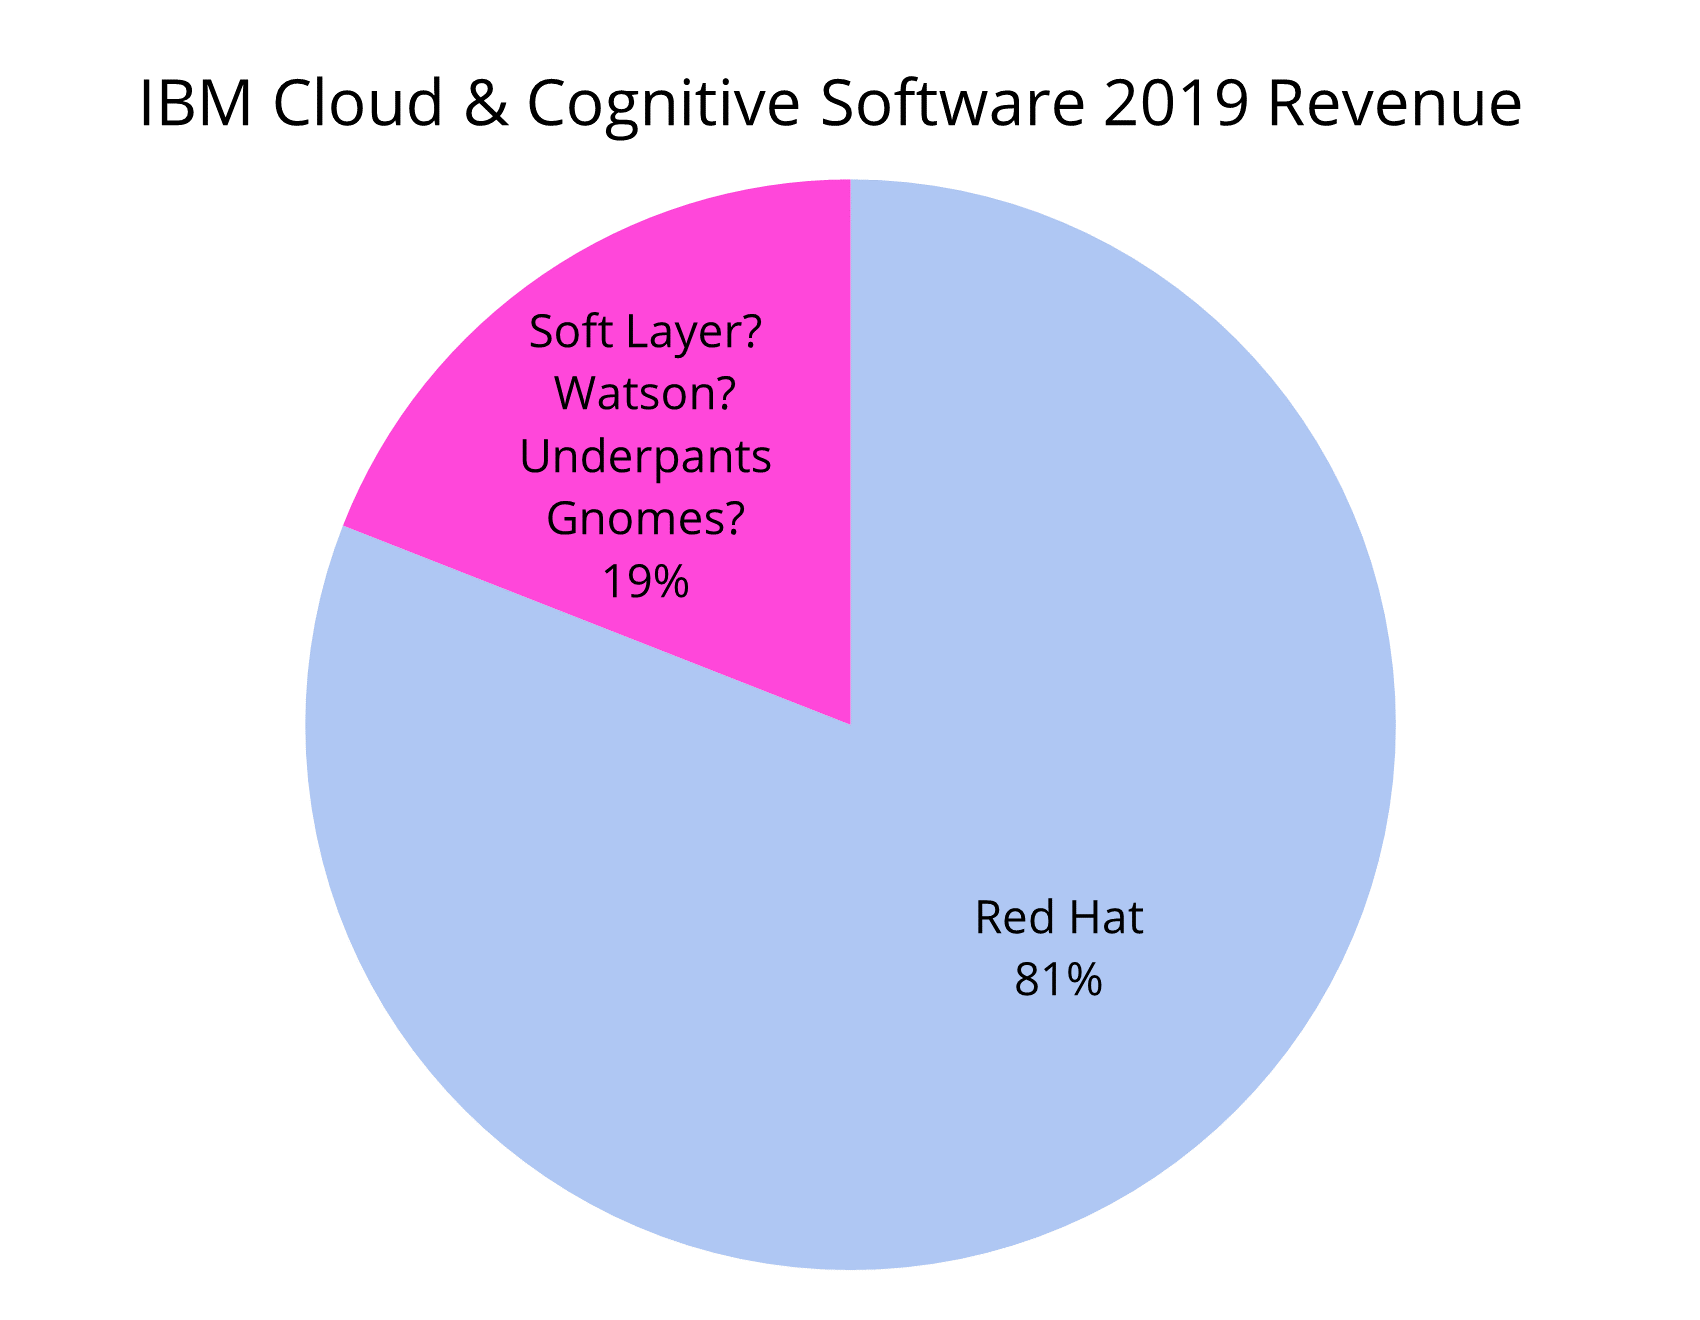 A pie chart showing IBM’s Cloud and Cognitive revenue in 2019. 81% for Red Hat and 19% for SoftLayer? Watson? Underpants Gnomes?